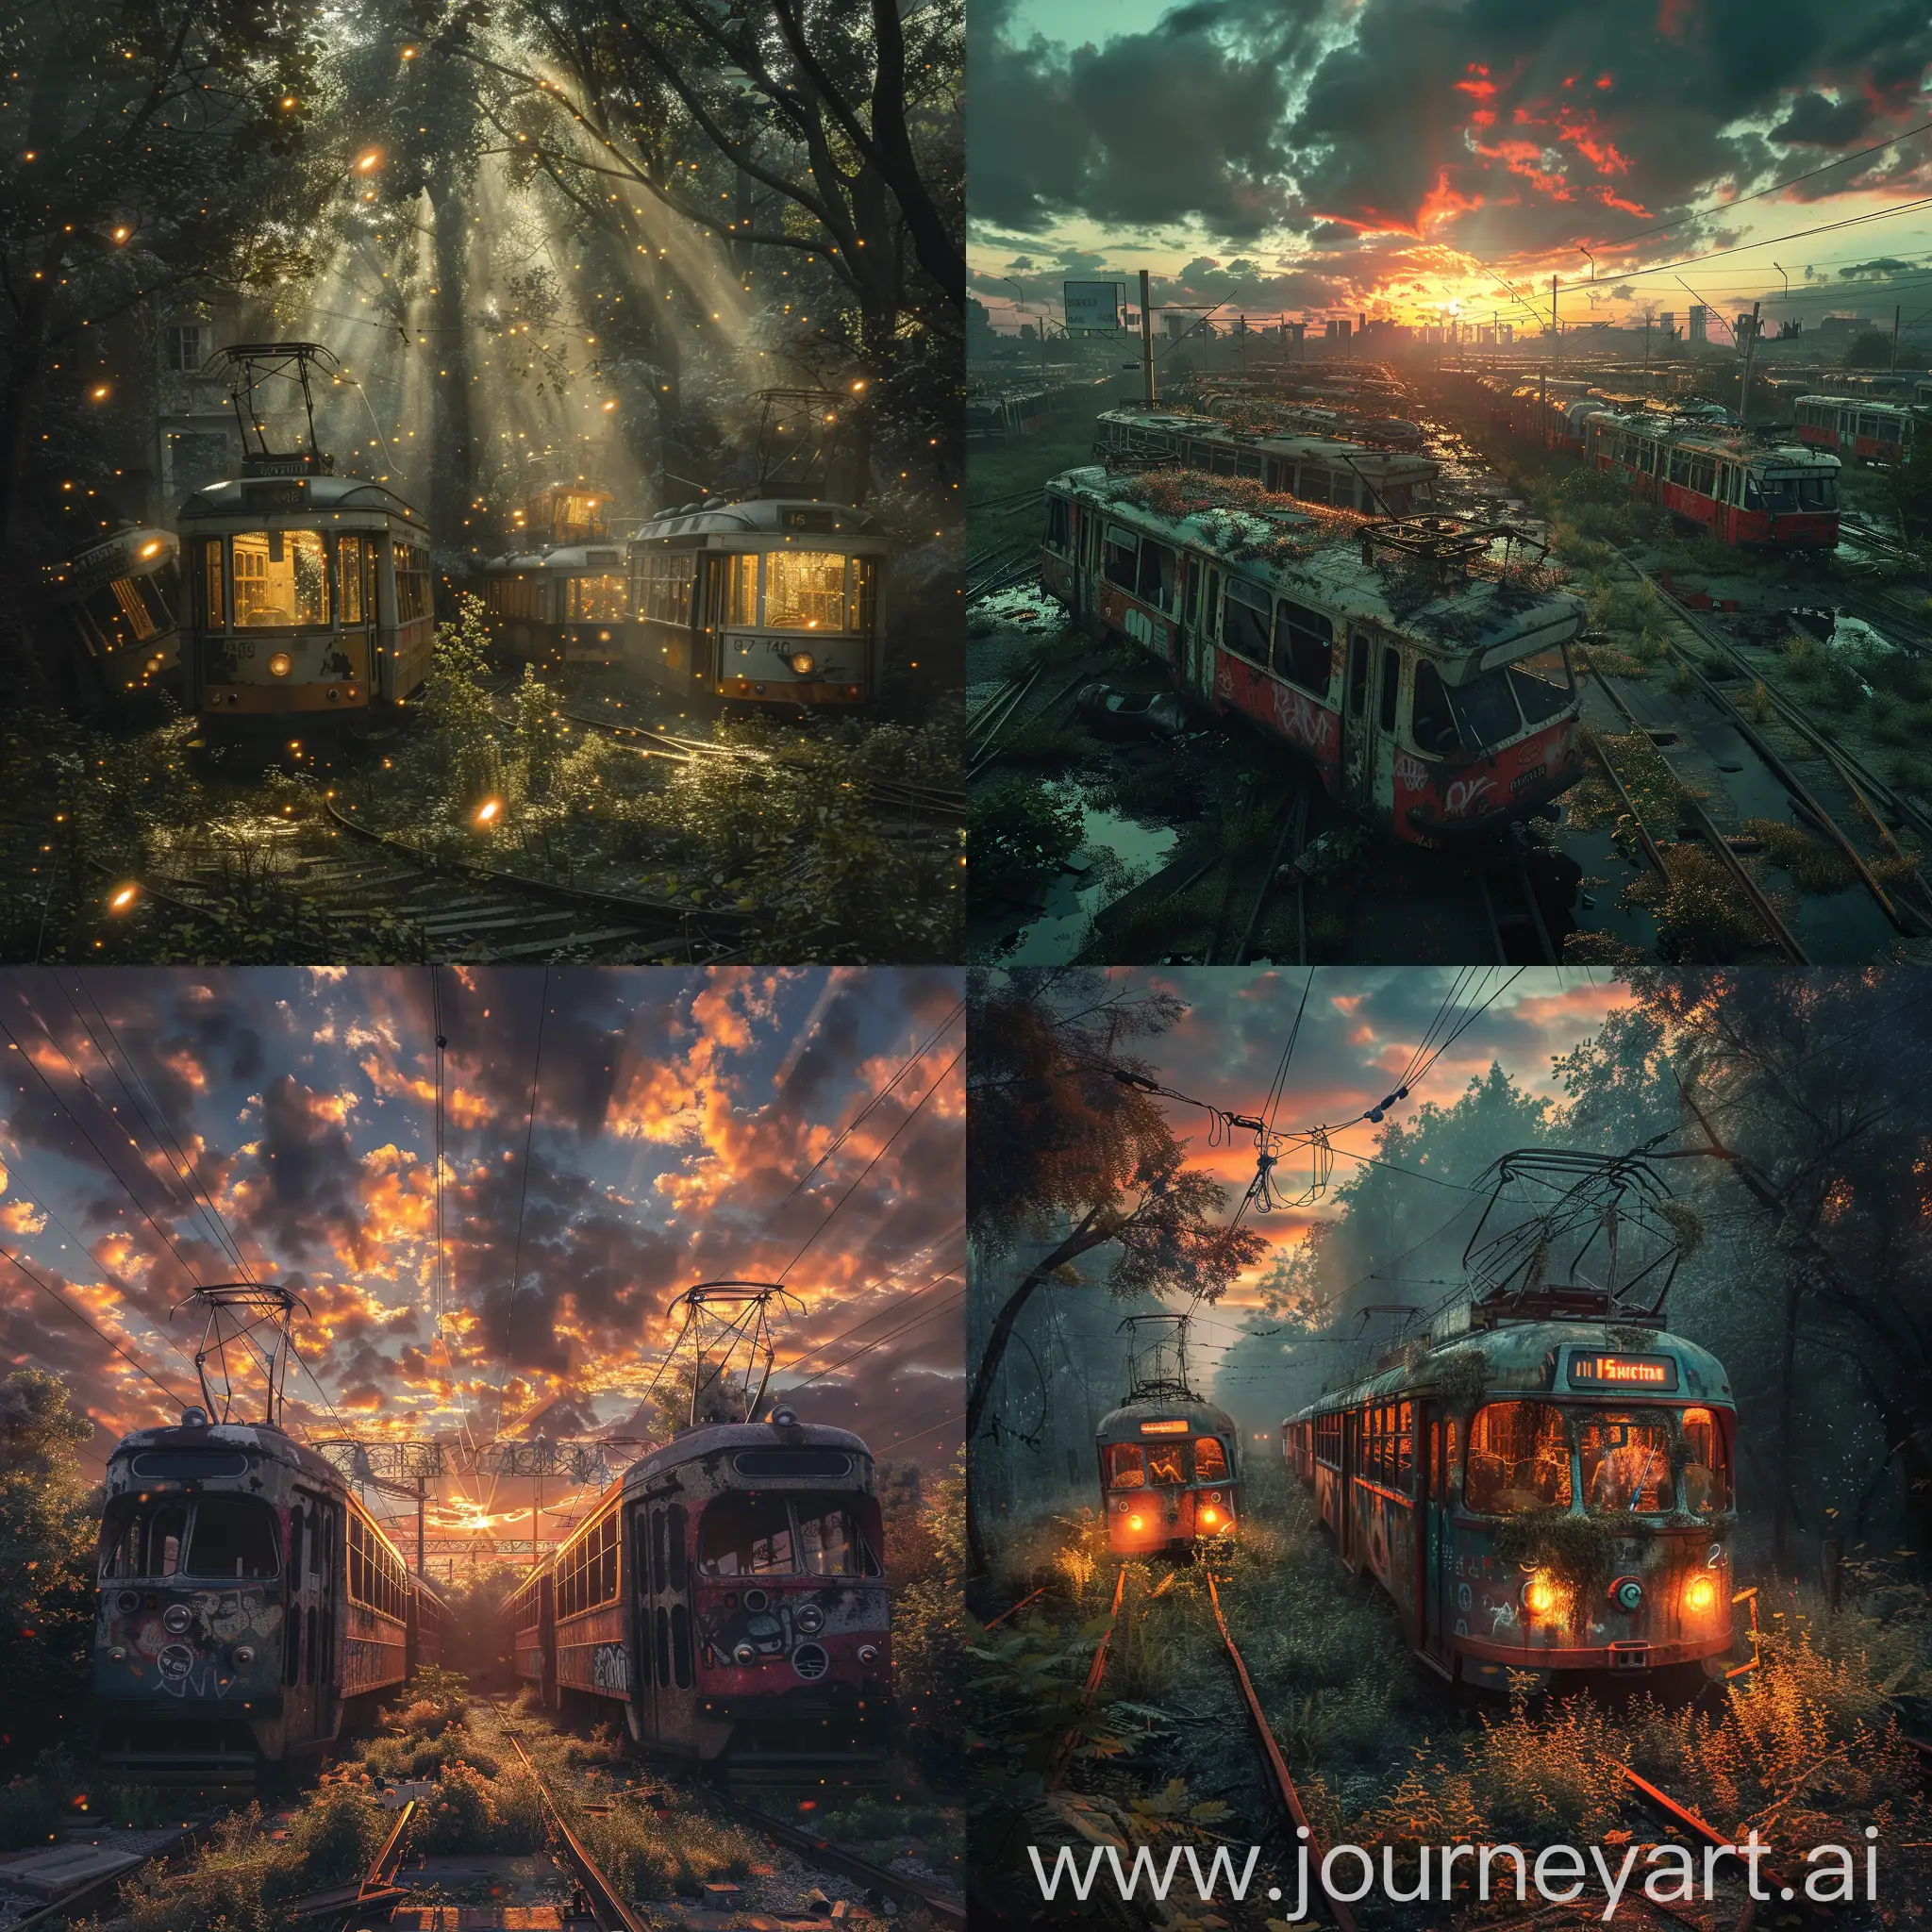 Impossible surreal light shines over small trams graveyard, scary, beautiful